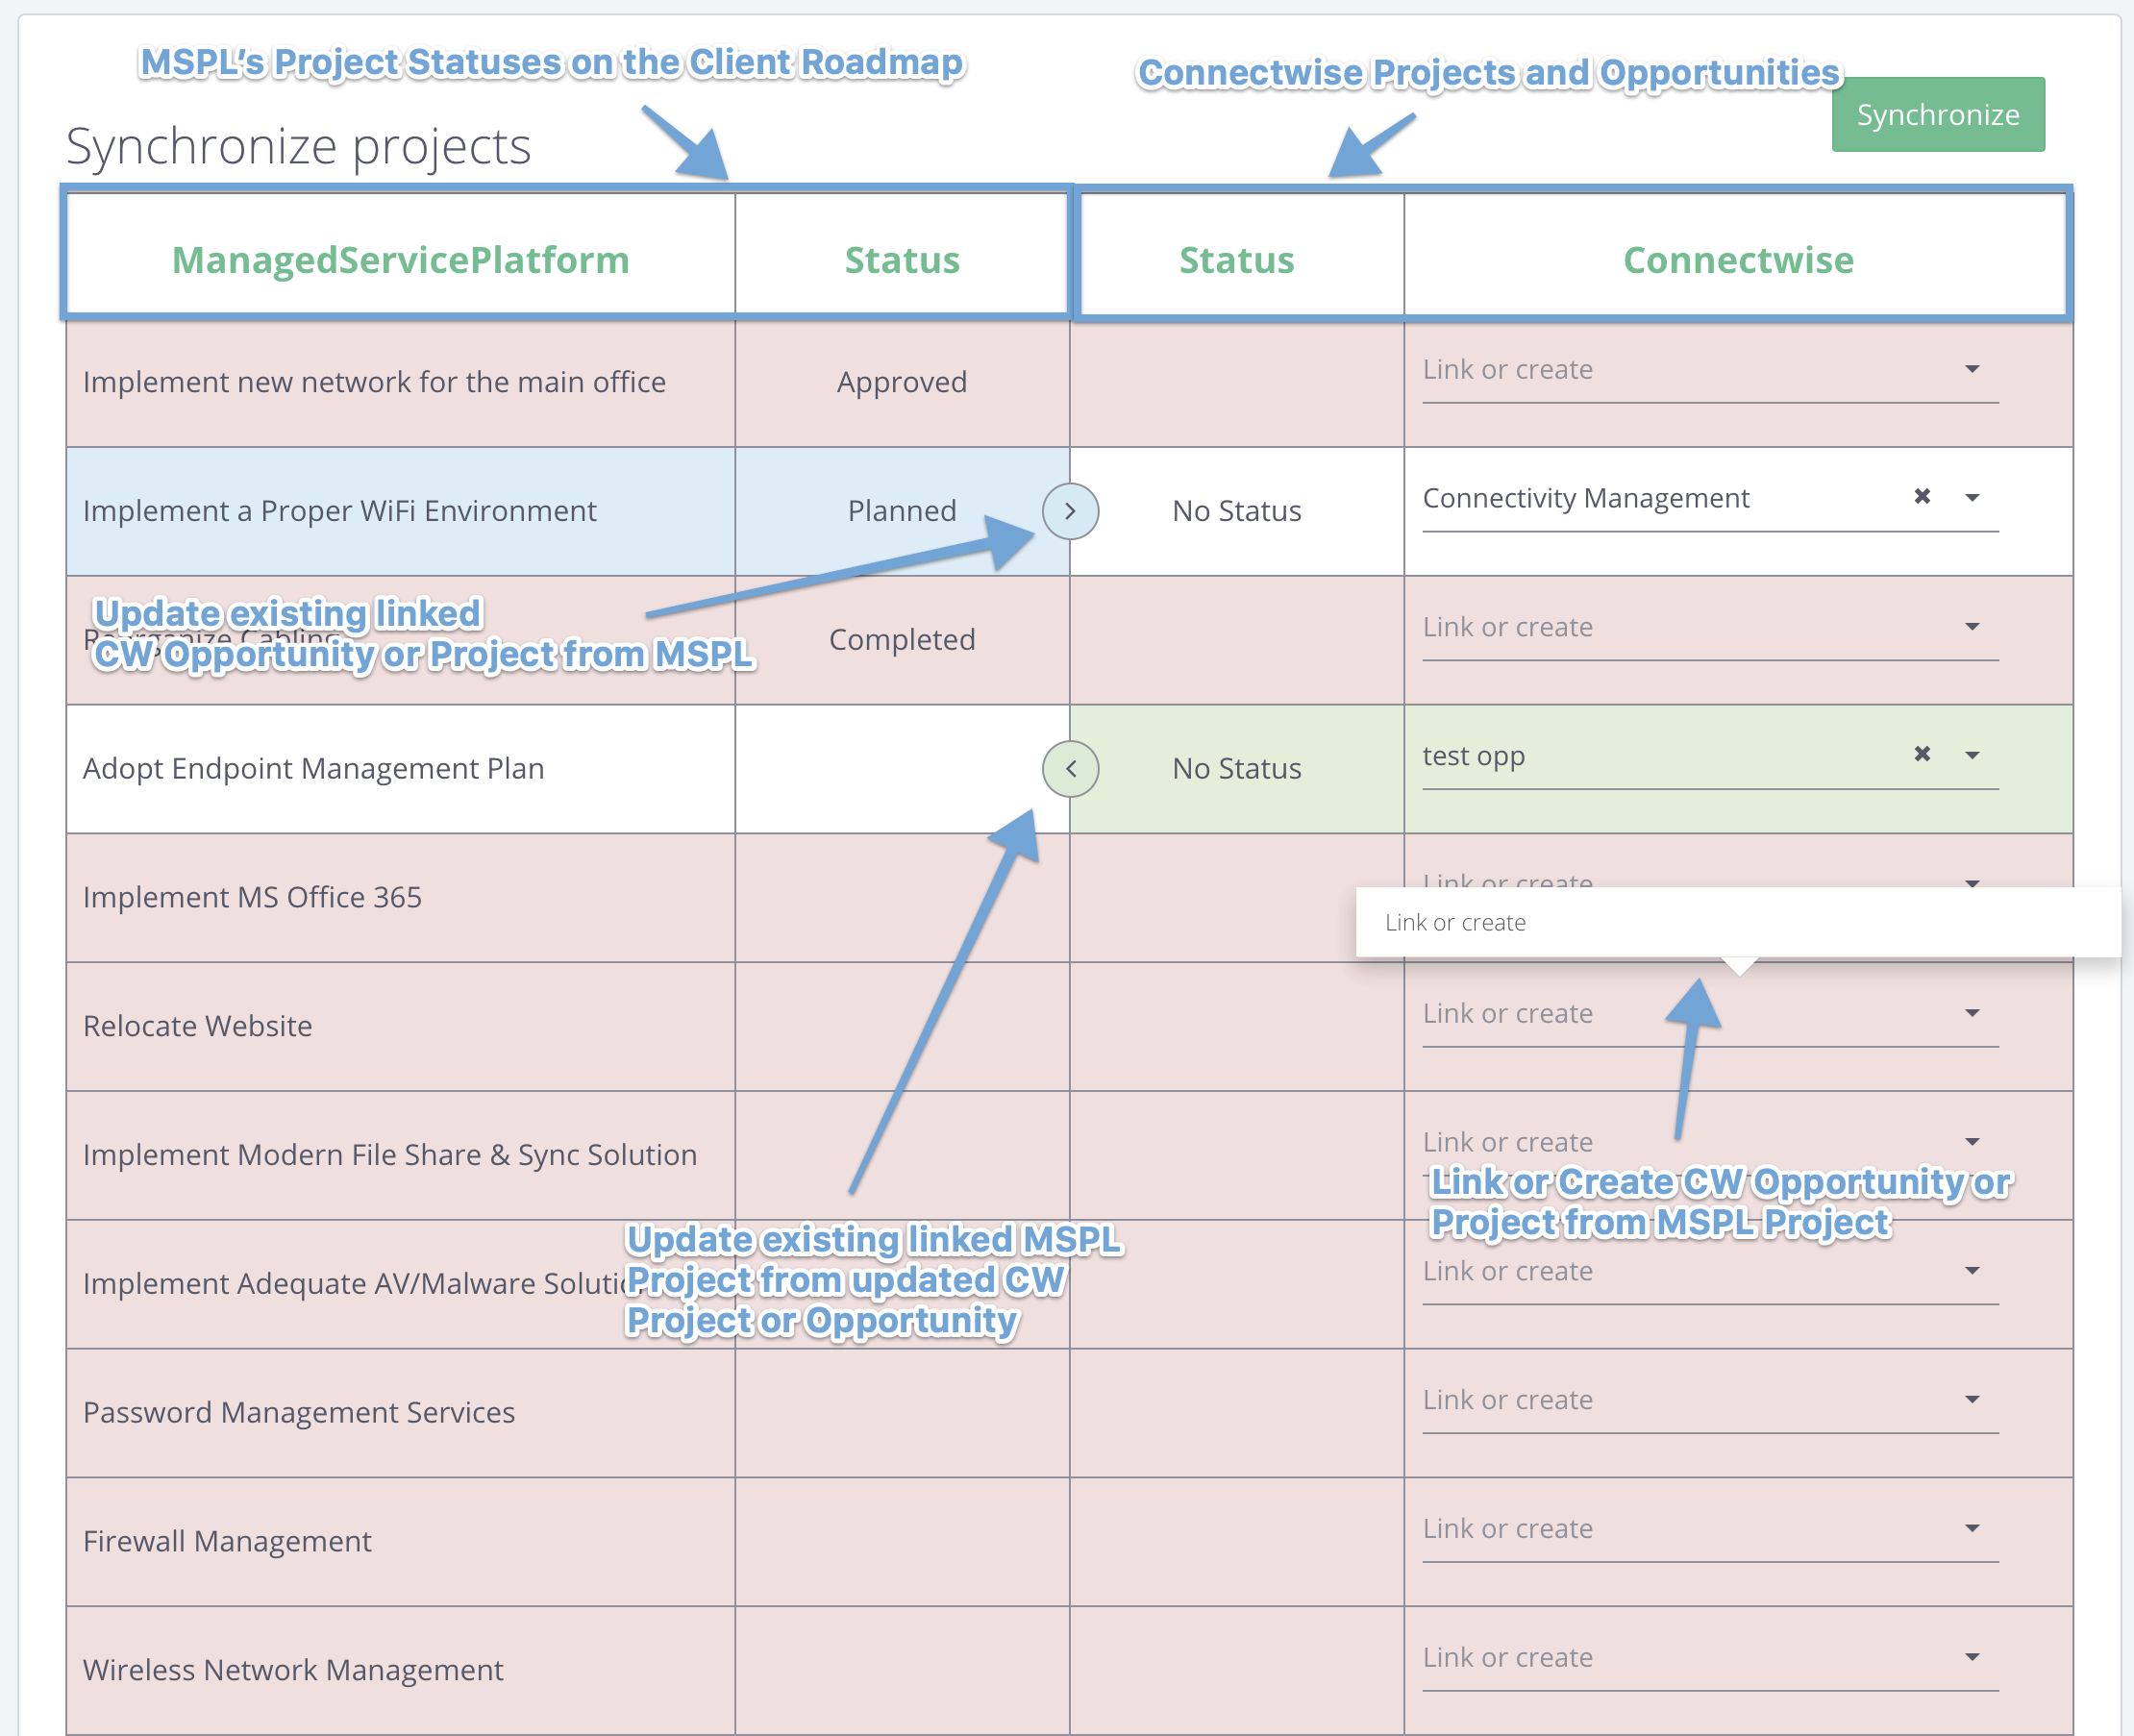 The 2-way sync screen shows ONLY projects in your Client Project Roadmap which are NOT synced with Connectwise.